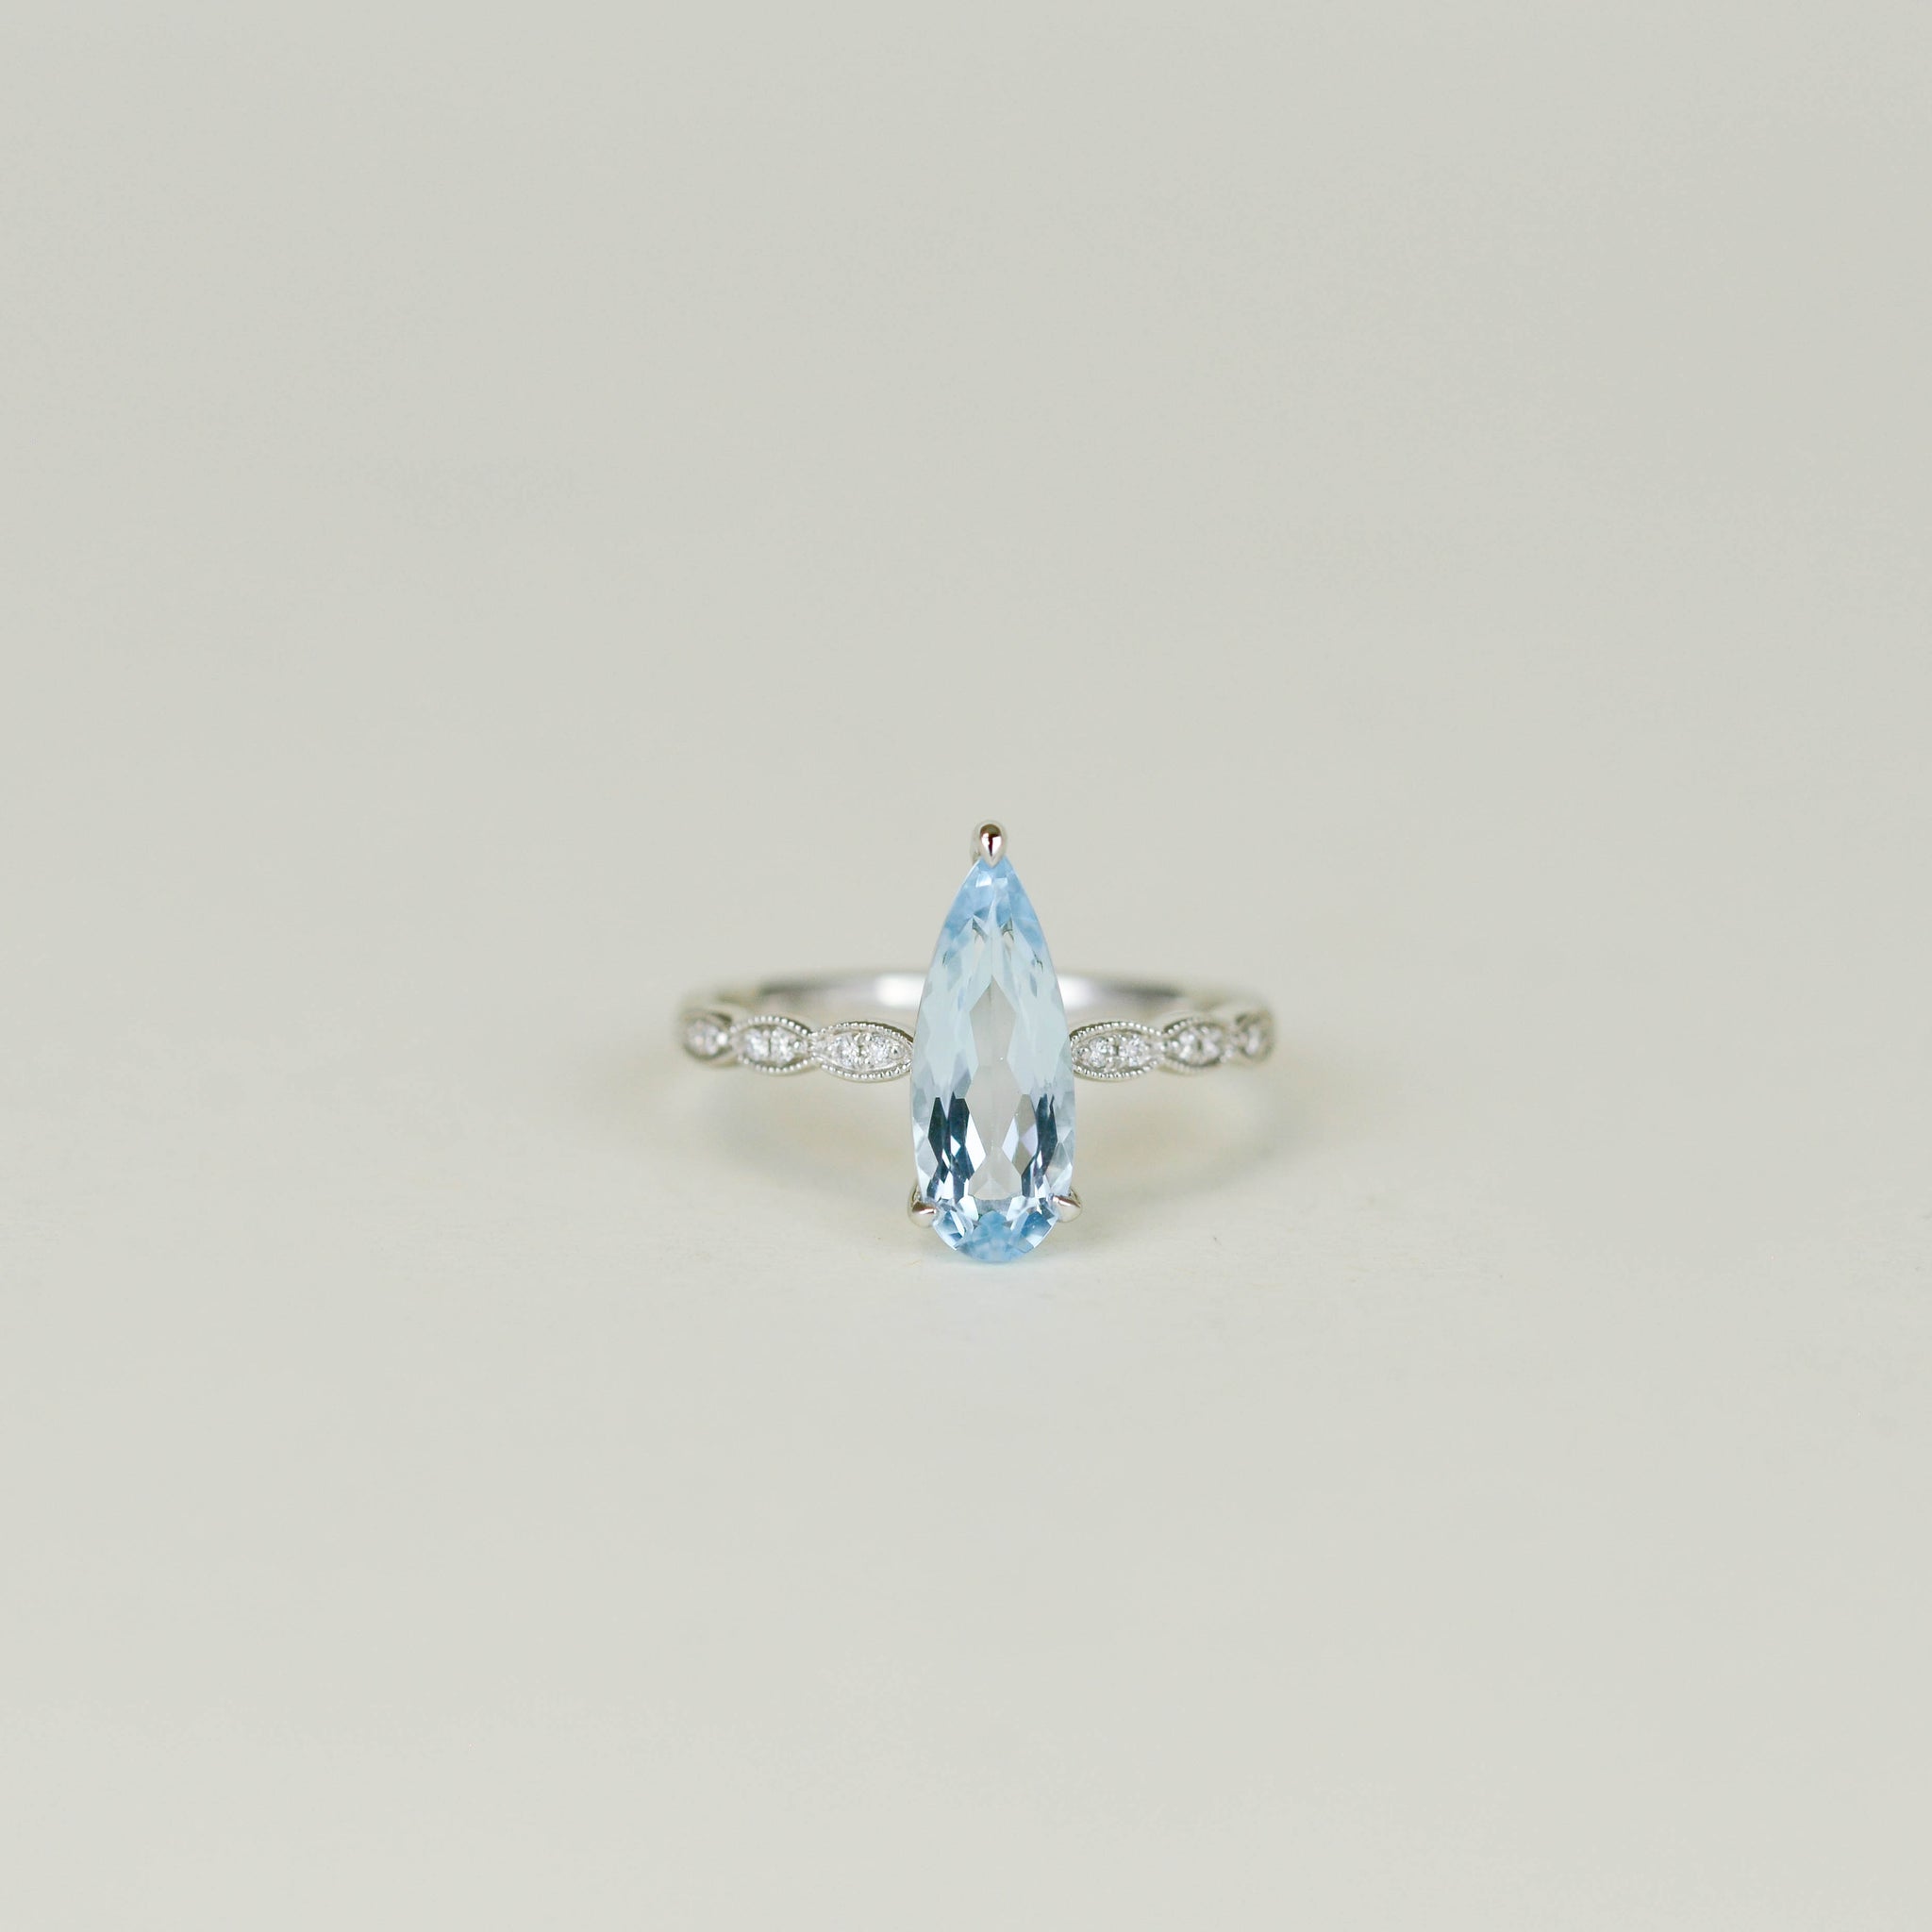 9ct White Gold 2.03ct Elongated Pear Cut Blue Topaz and Diamond Ring